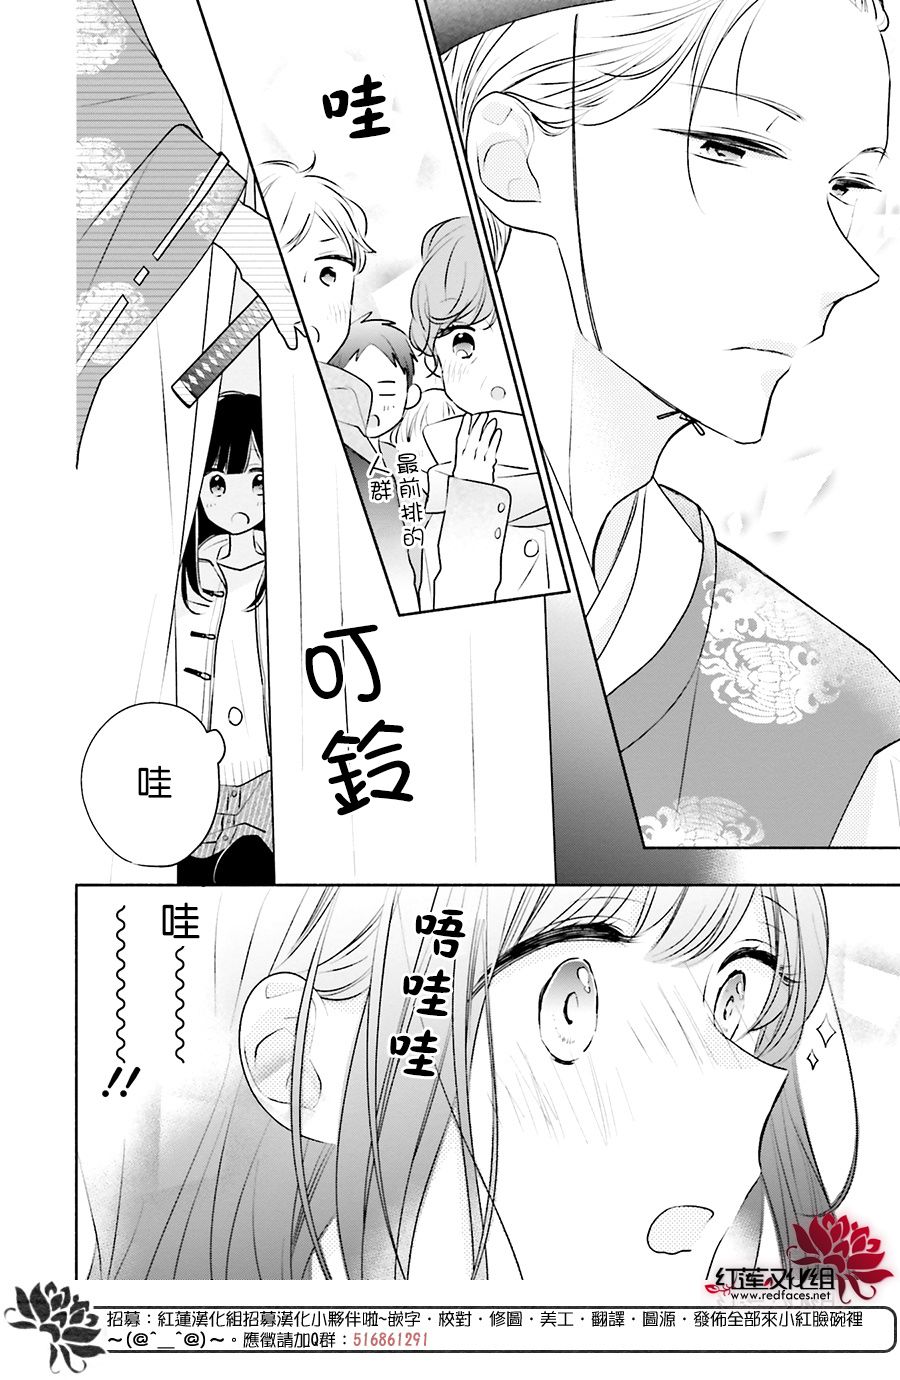 If given a second chance - 24話 - 4